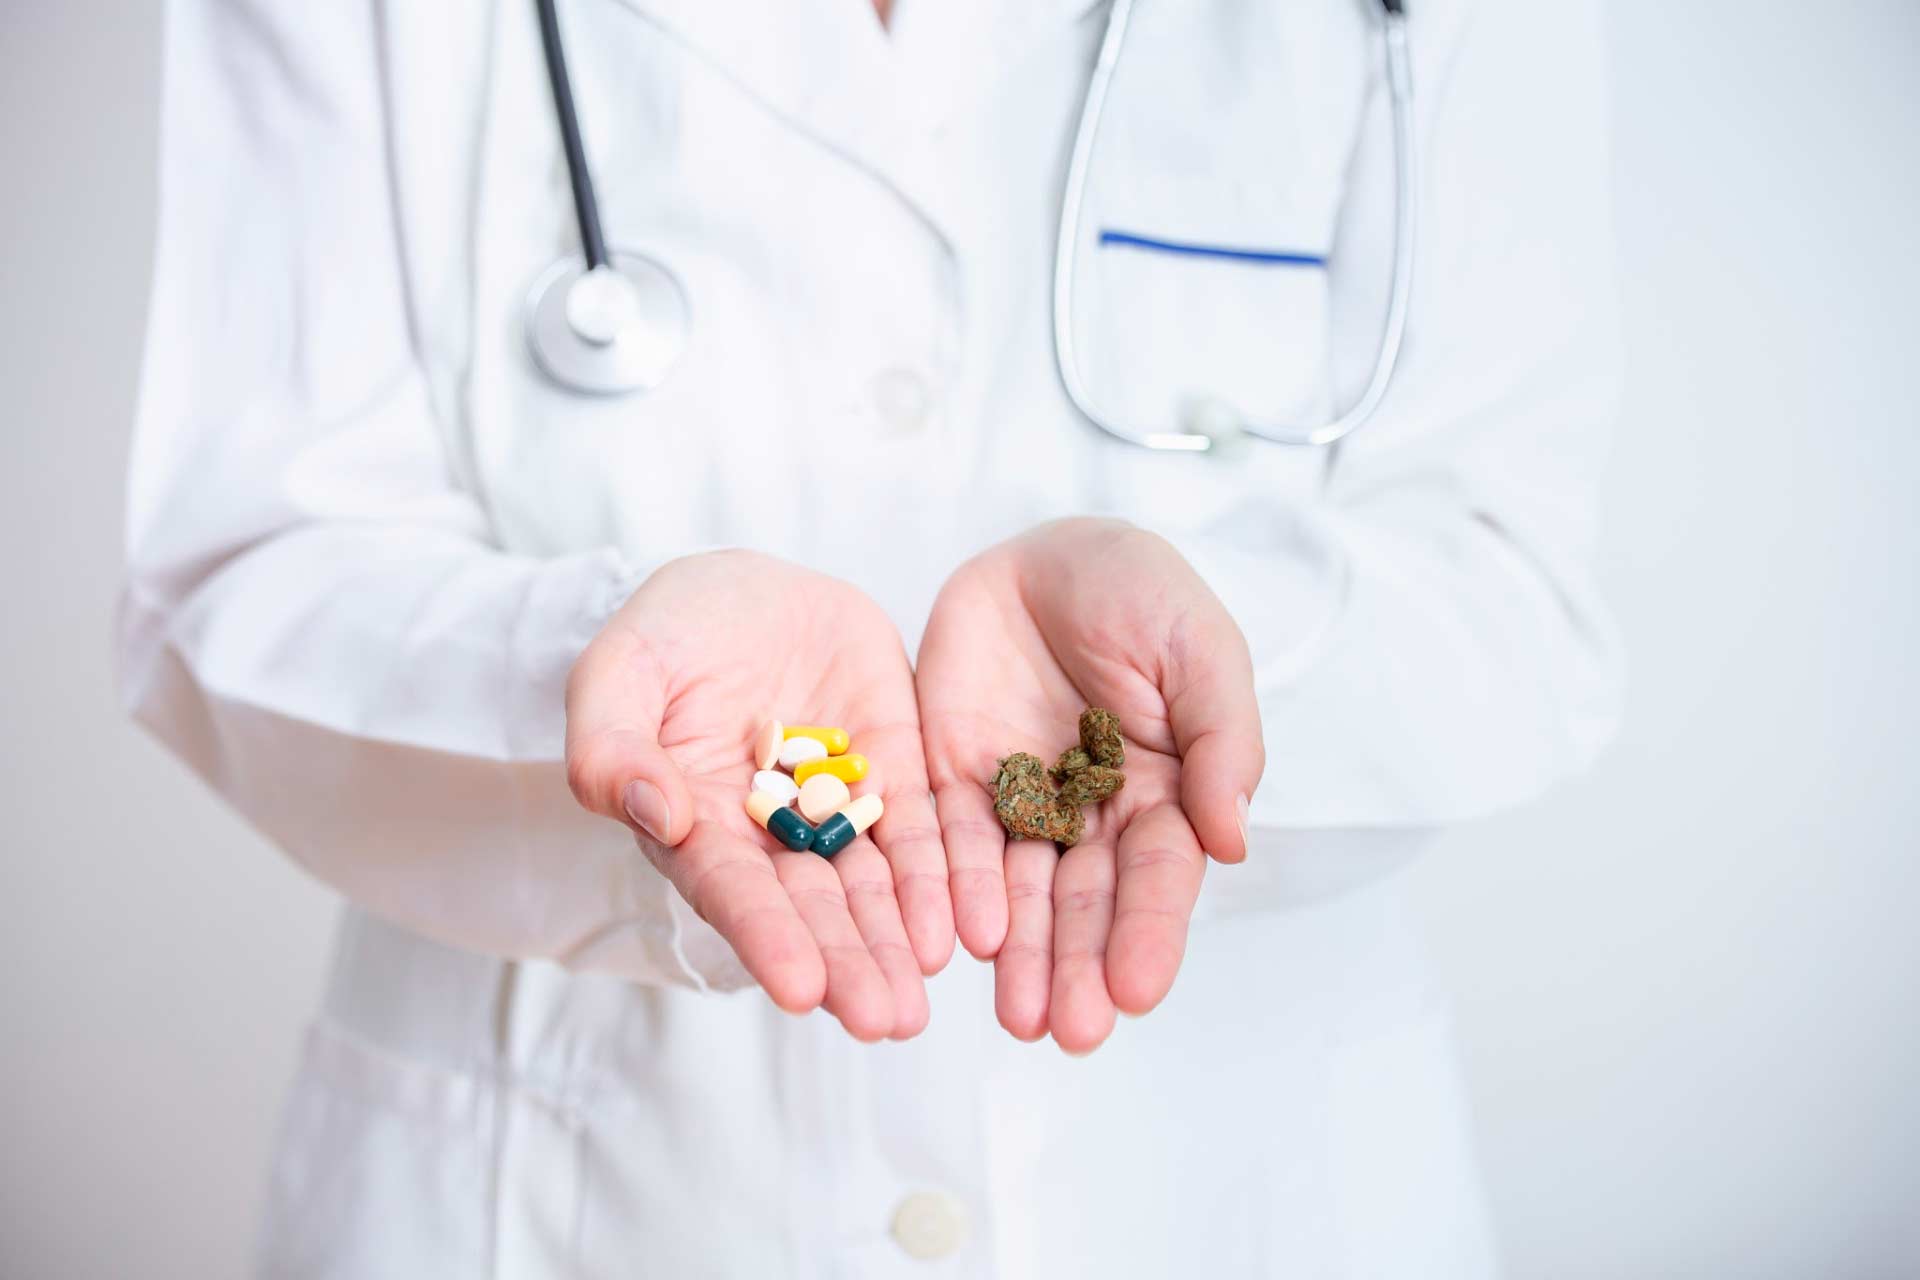 Medical provider holding sleep pills in one hand, and cannabis in the other hand as an alternative for sleep.